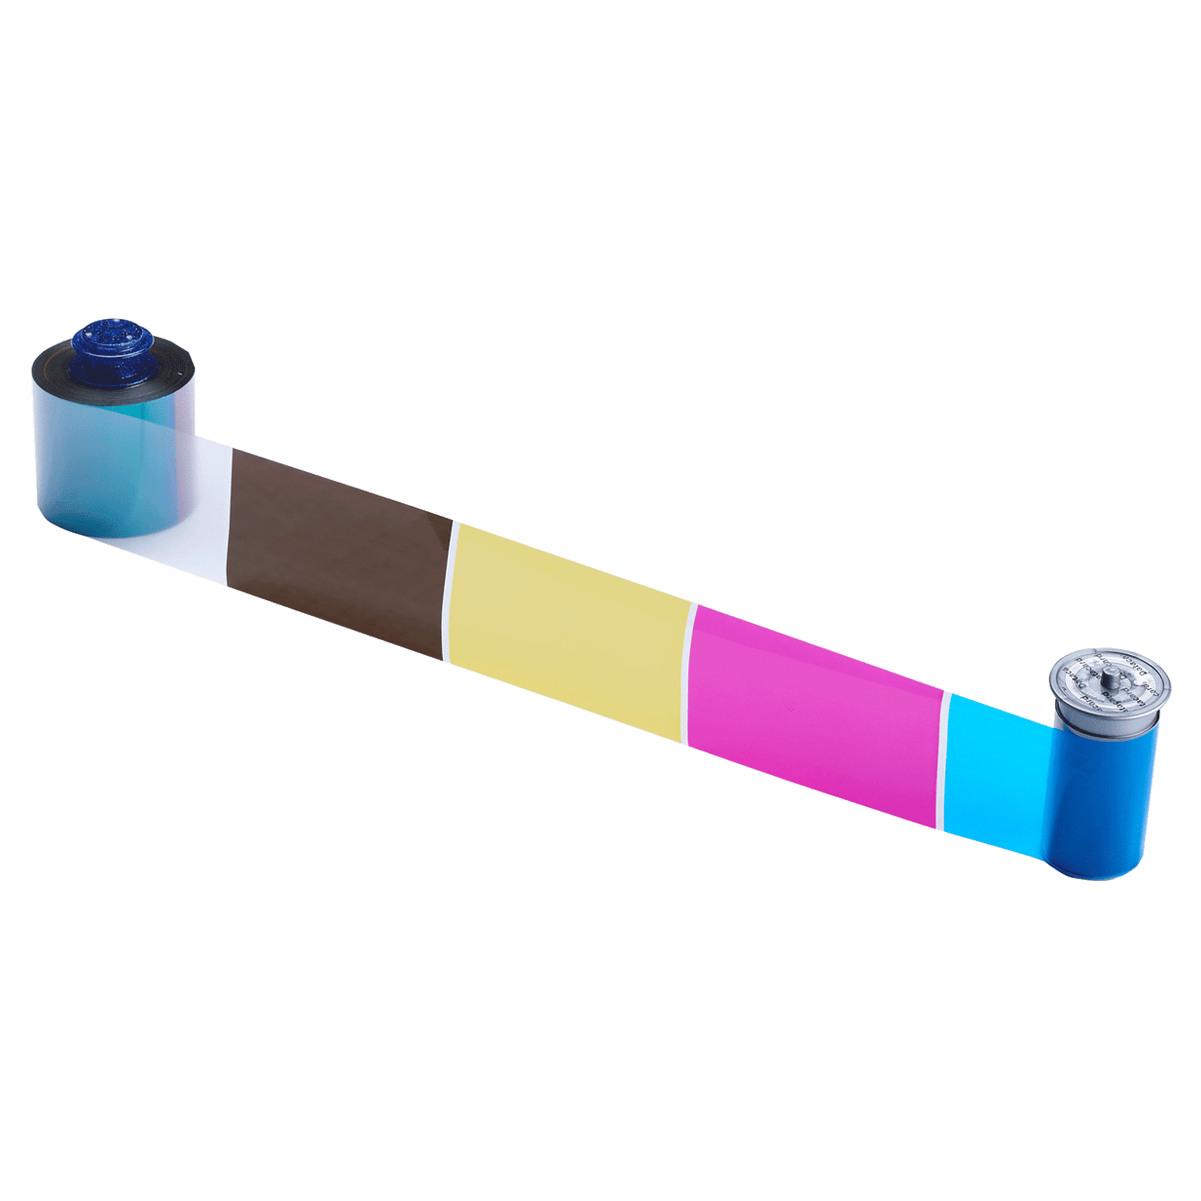 A partially unwound Entrust 513382-201 CMYKP Color Pigment Ribbon - 1000 Prints with segments of black, yellow, magenta, and cyan between two blue spool cartridges, suitable for use in a Retransfer Card Printer like the Entrust Artista CR805.